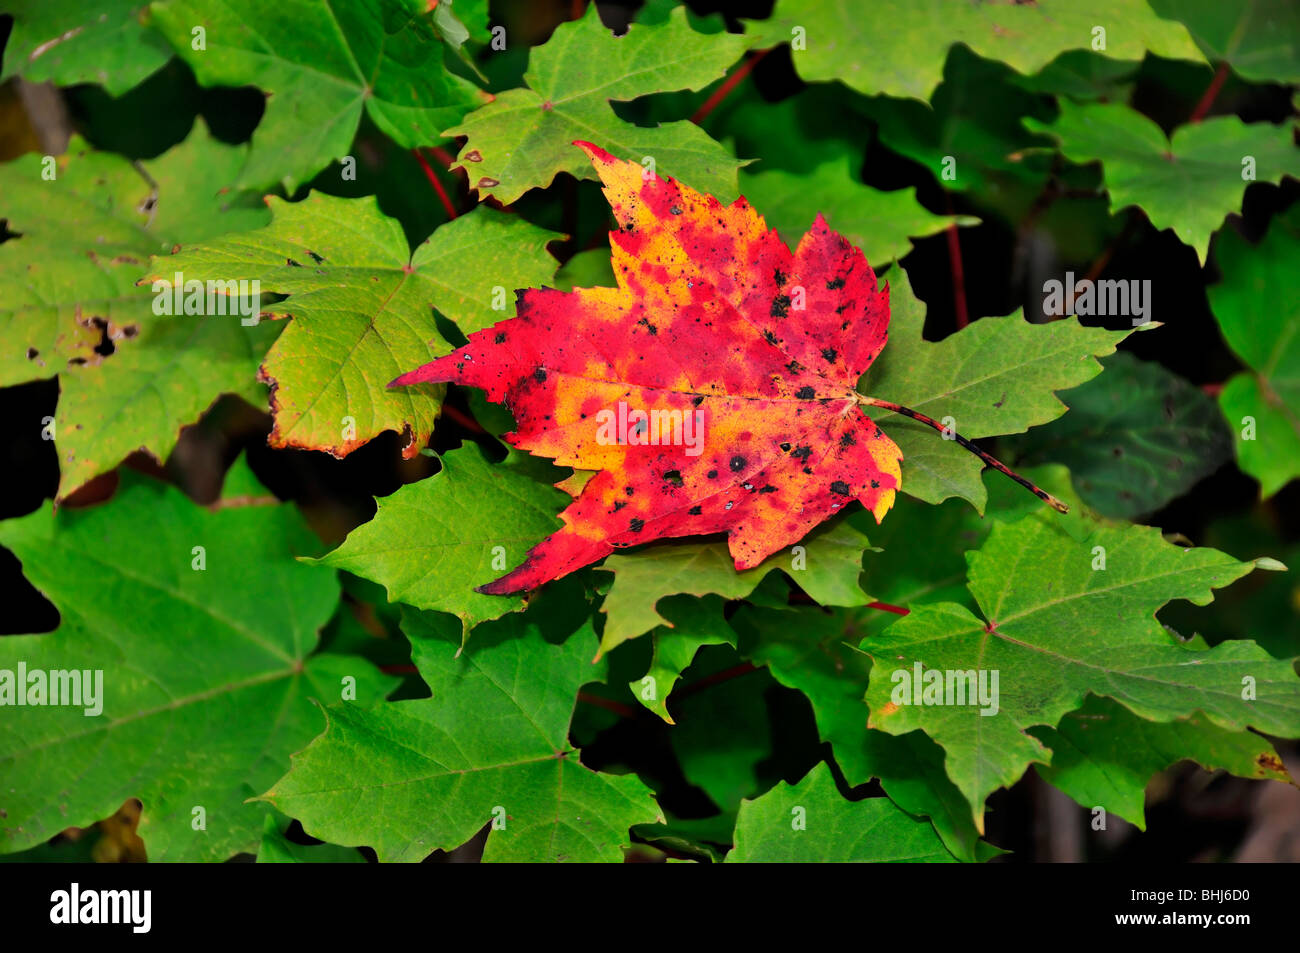 A single red autumn leaf rests on green leaves. USA Stock Photo